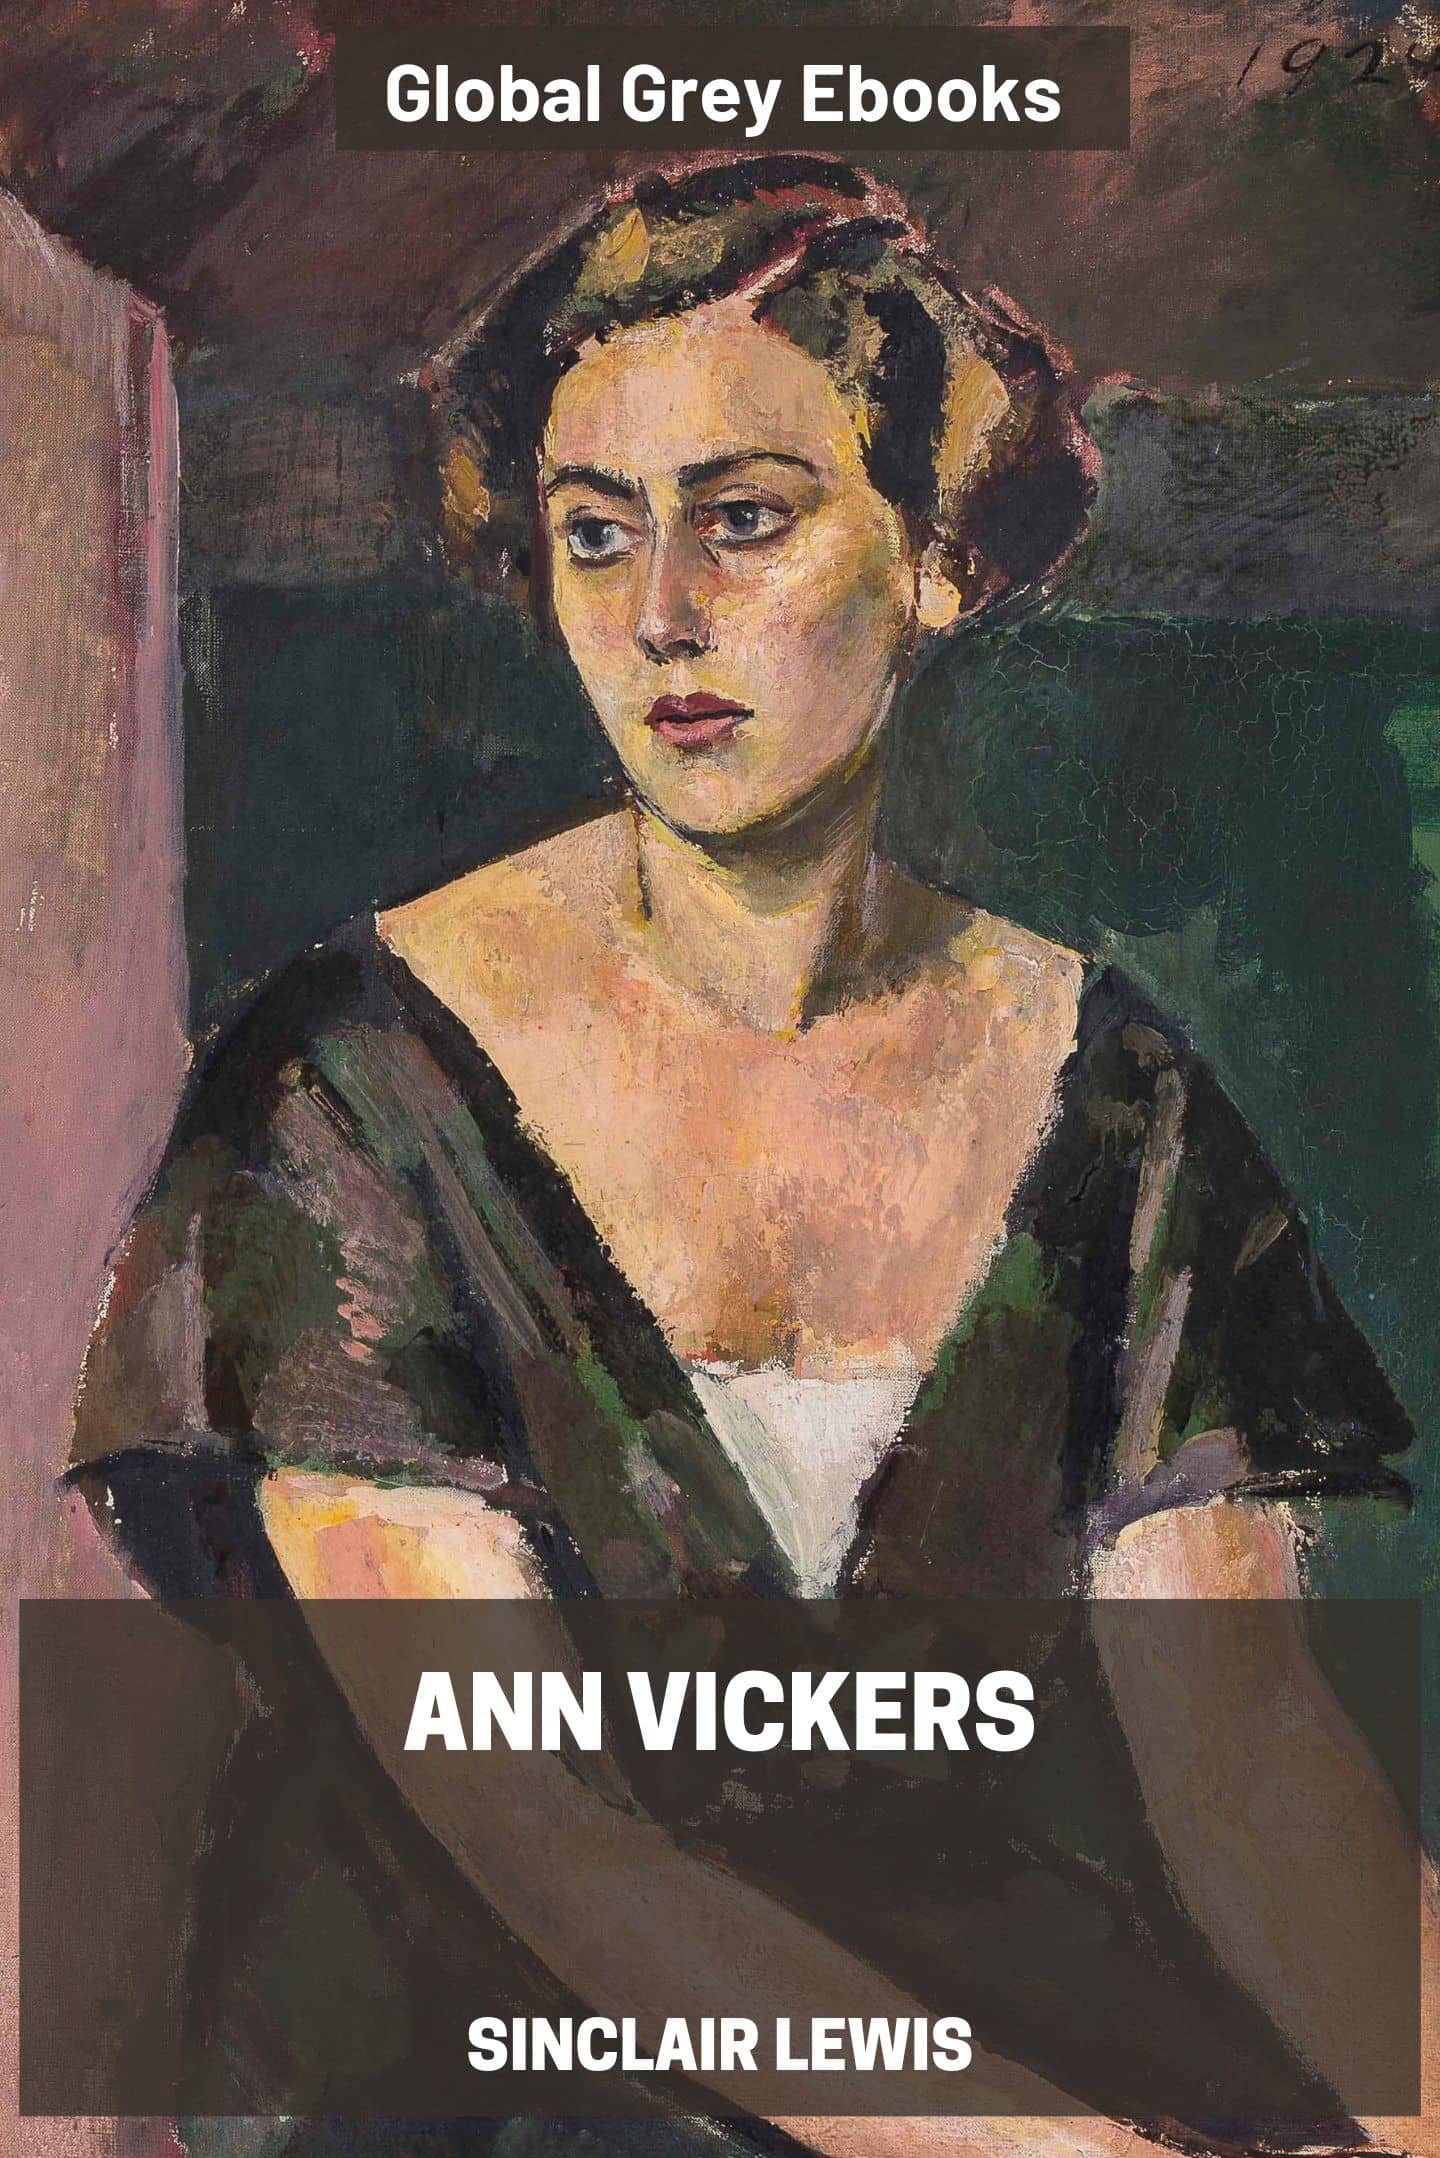 Ann Vickers by Sinclair Lewis - Complete text online Xxx Pic Hd